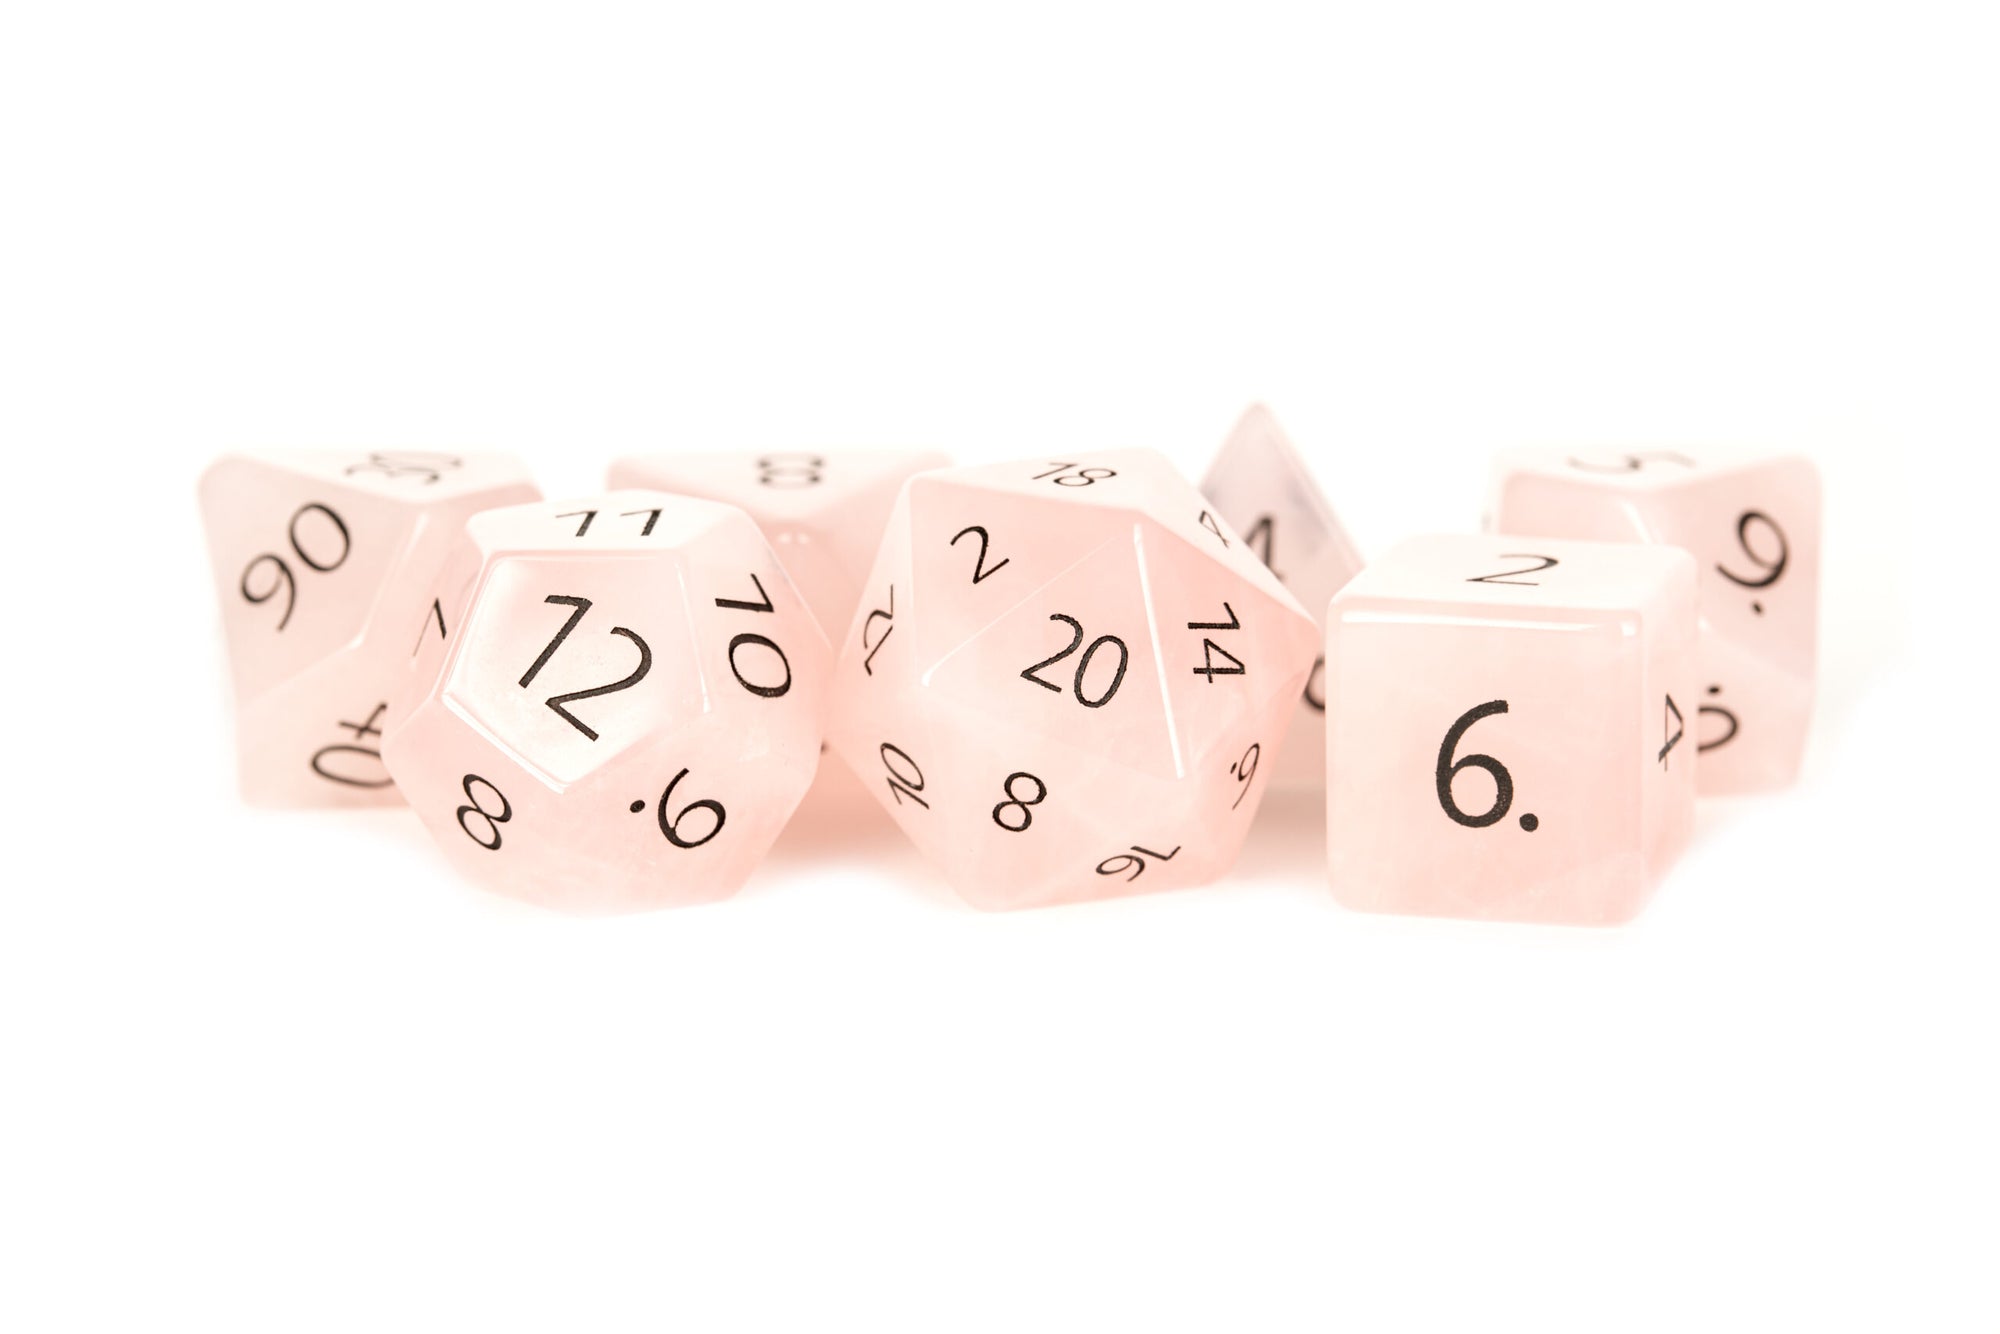 Engraved Rose Quartz - Full-Sized 16mm Polyhedral Dice Set - Space Camp